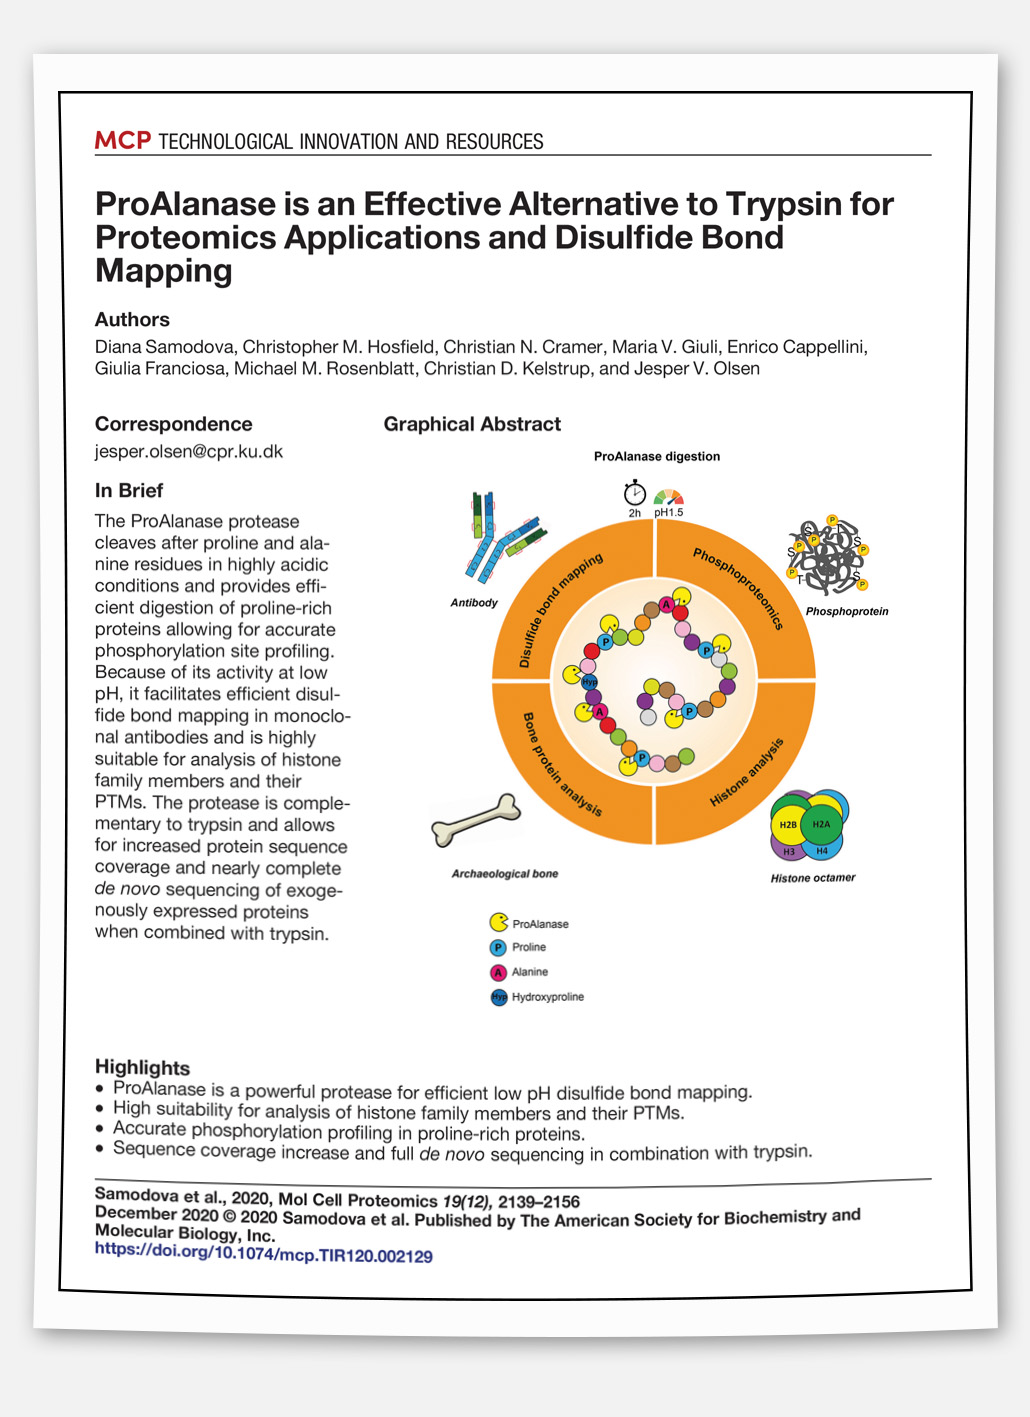 Paper: ProAlanase is an effective alternative to trypsin for proteomics applications and disulfide bond mapping.